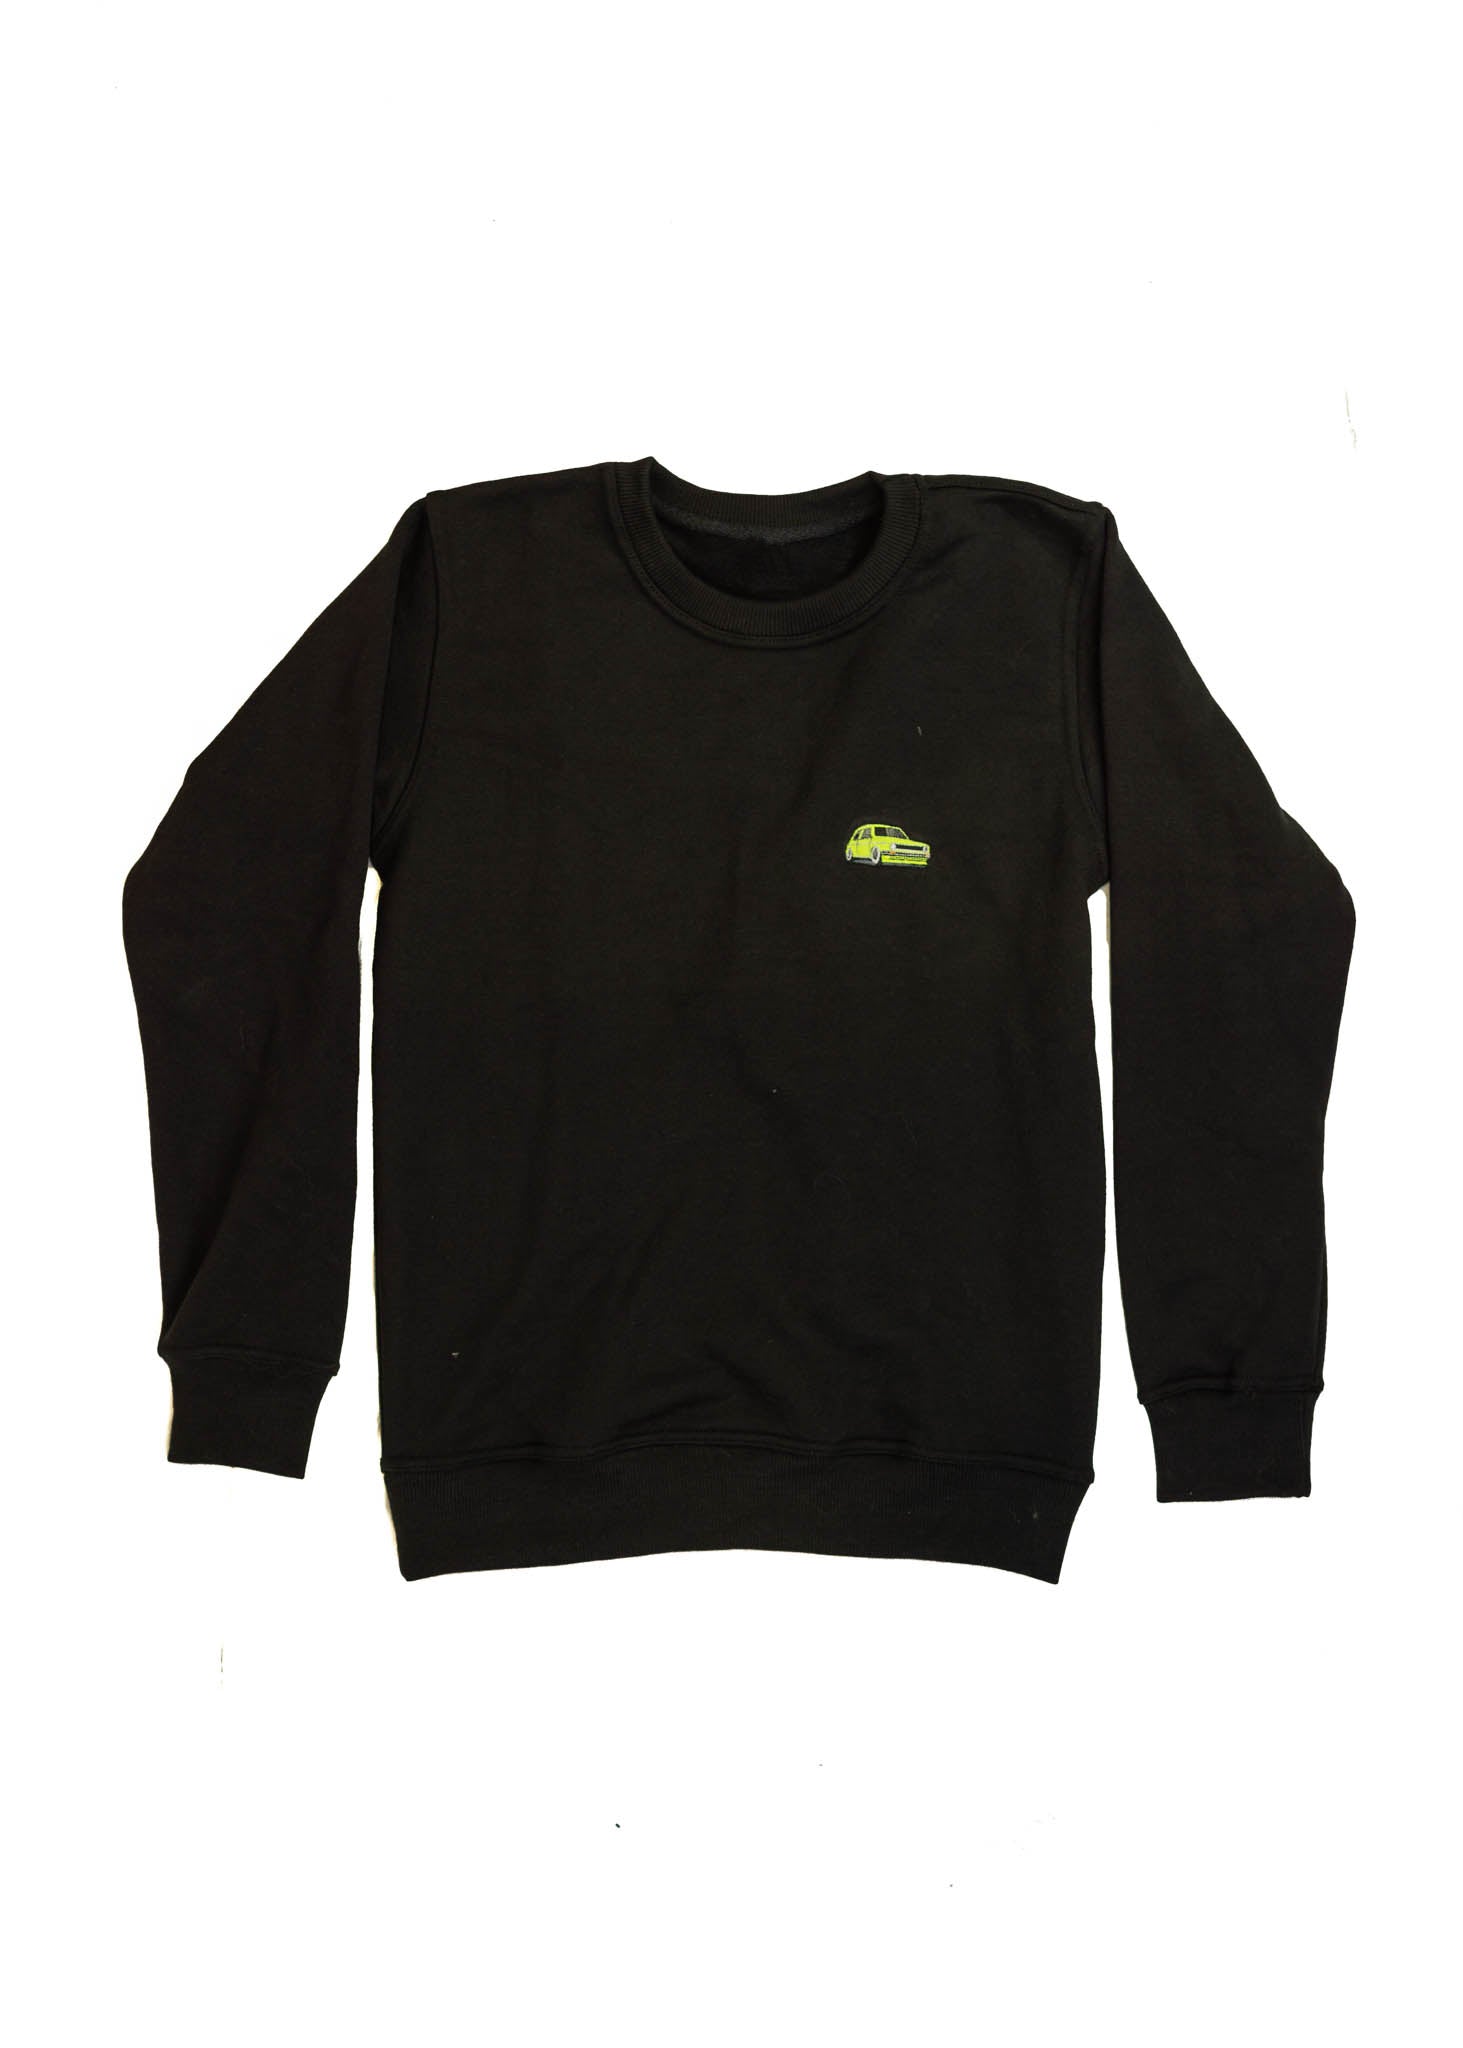 A black VW Volkswagen crewneck sweater for men. Photo is the front of the sweater with an embroidered modified green VW Mk1 Golf. Fabric is 100% cotton and high quality and fits to size. The style is long sleeve, crew neck, and embroidery on left chest.